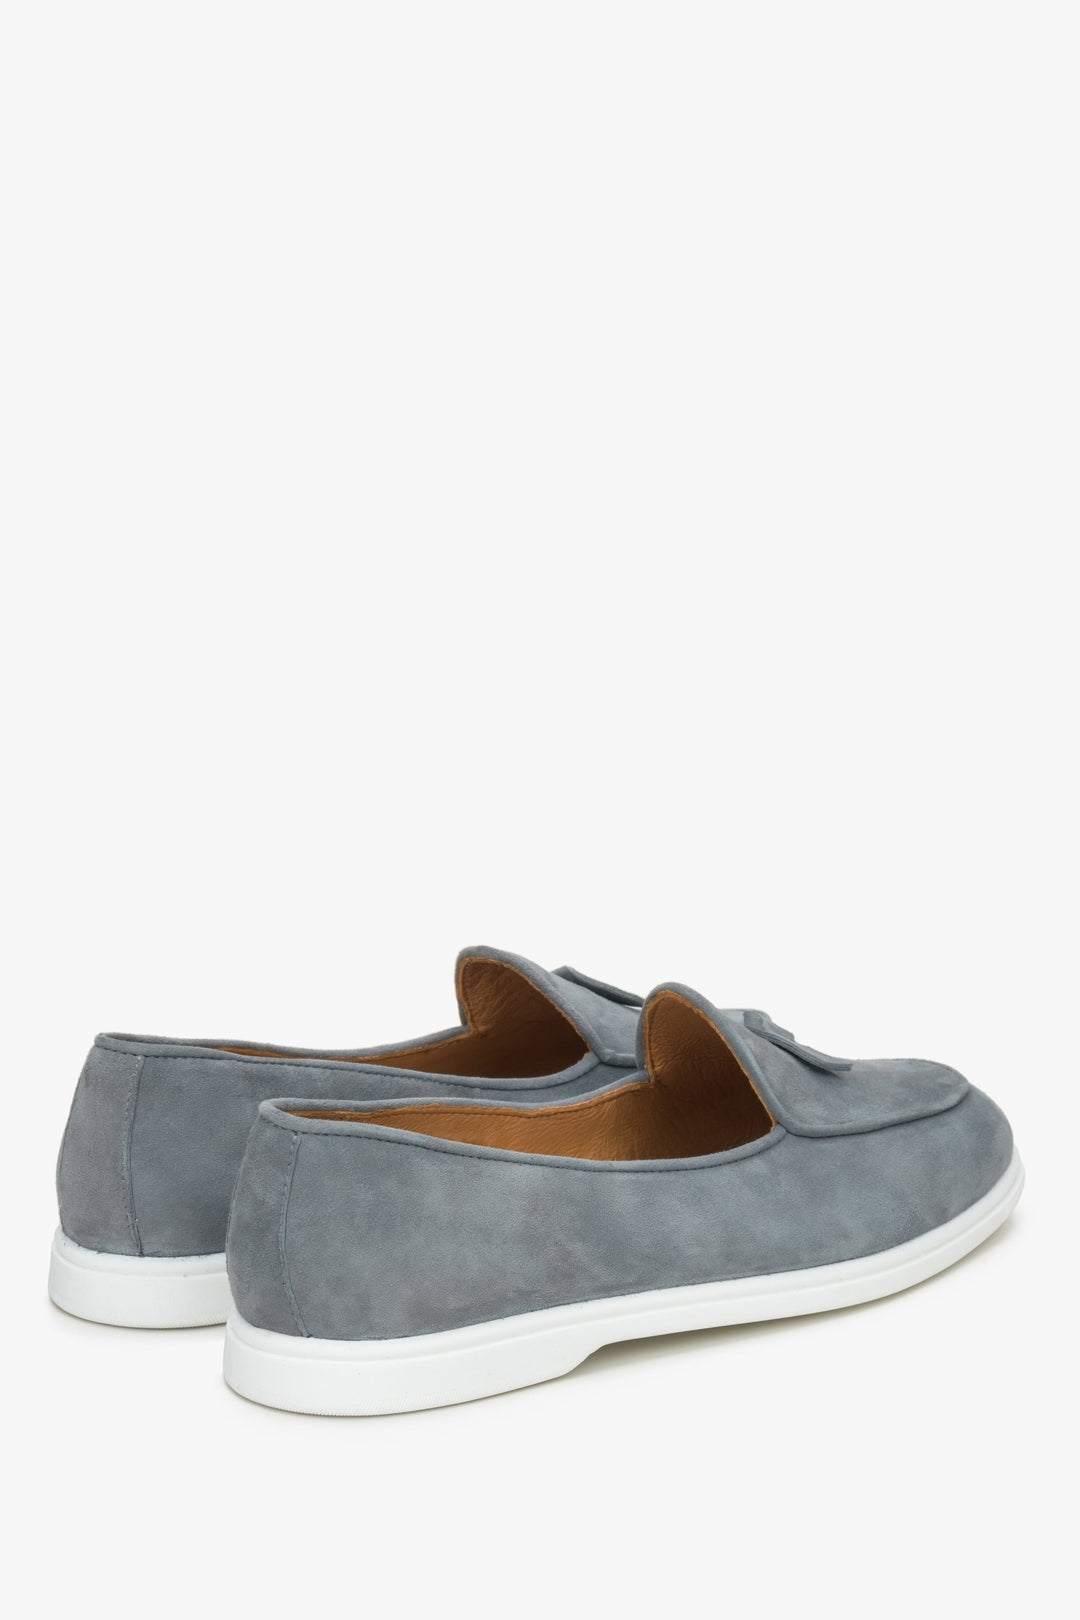 Women's grey velour loafers by Estro - close-up on the heel counter and side profile of the shoes.